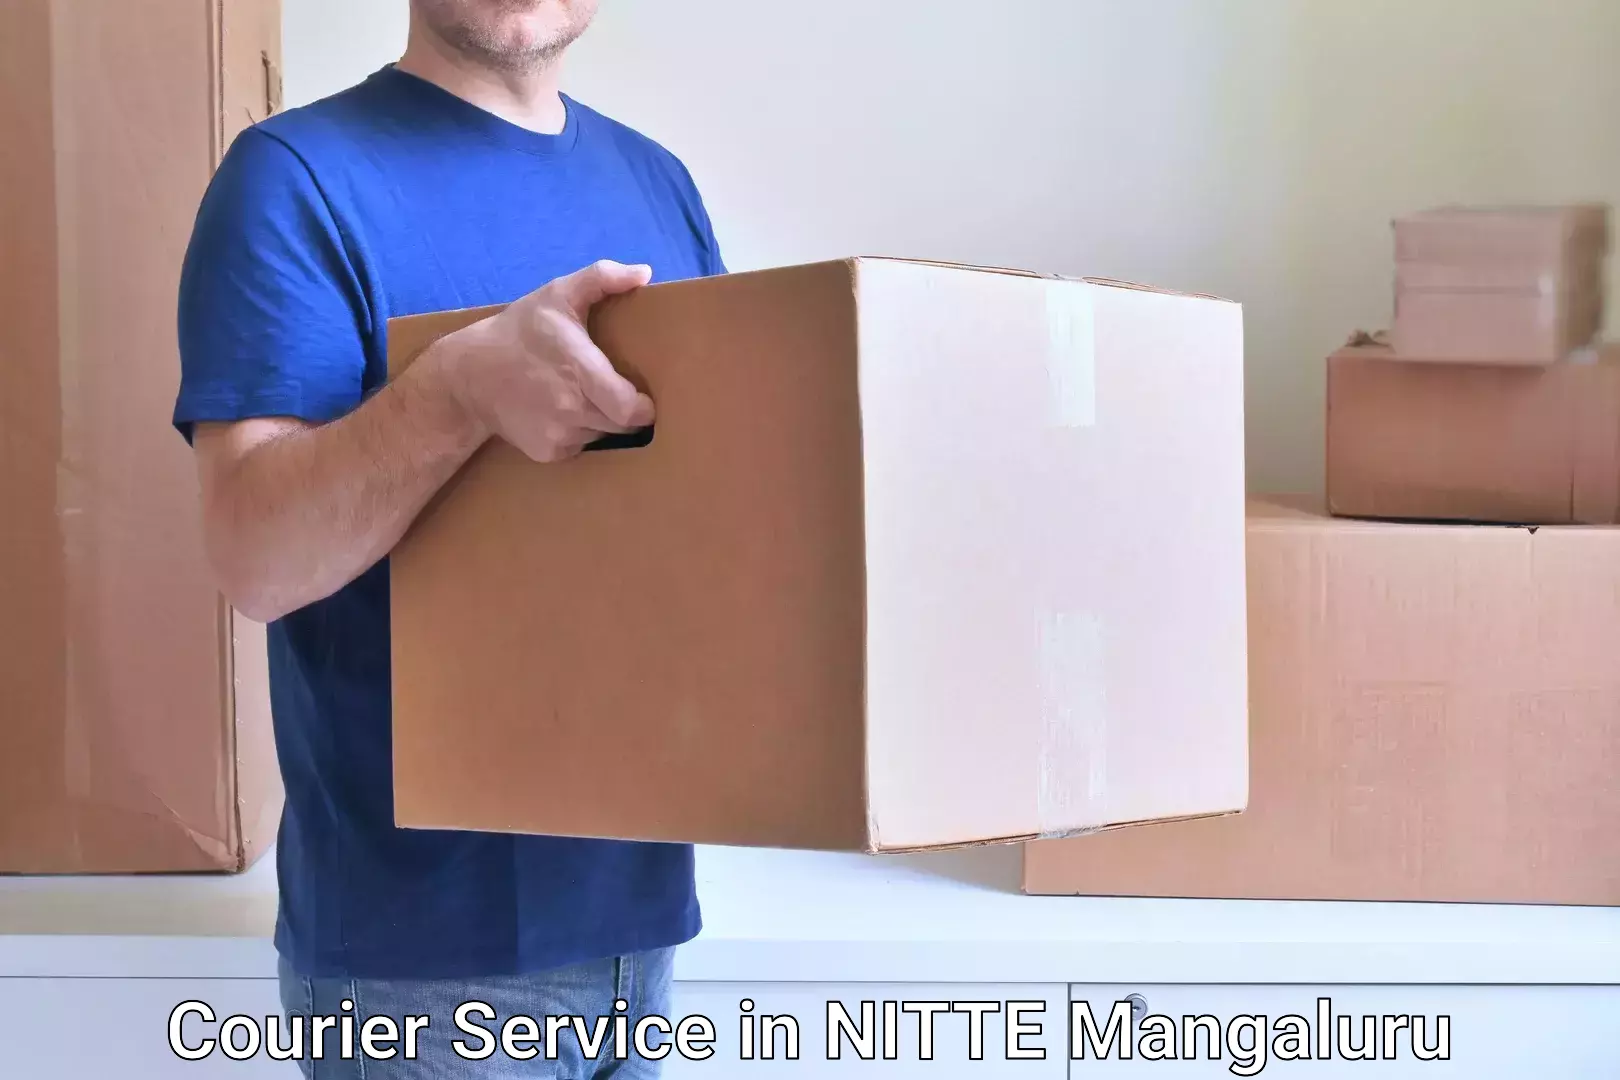 Reliable shipping partners in NITTE Mangaluru